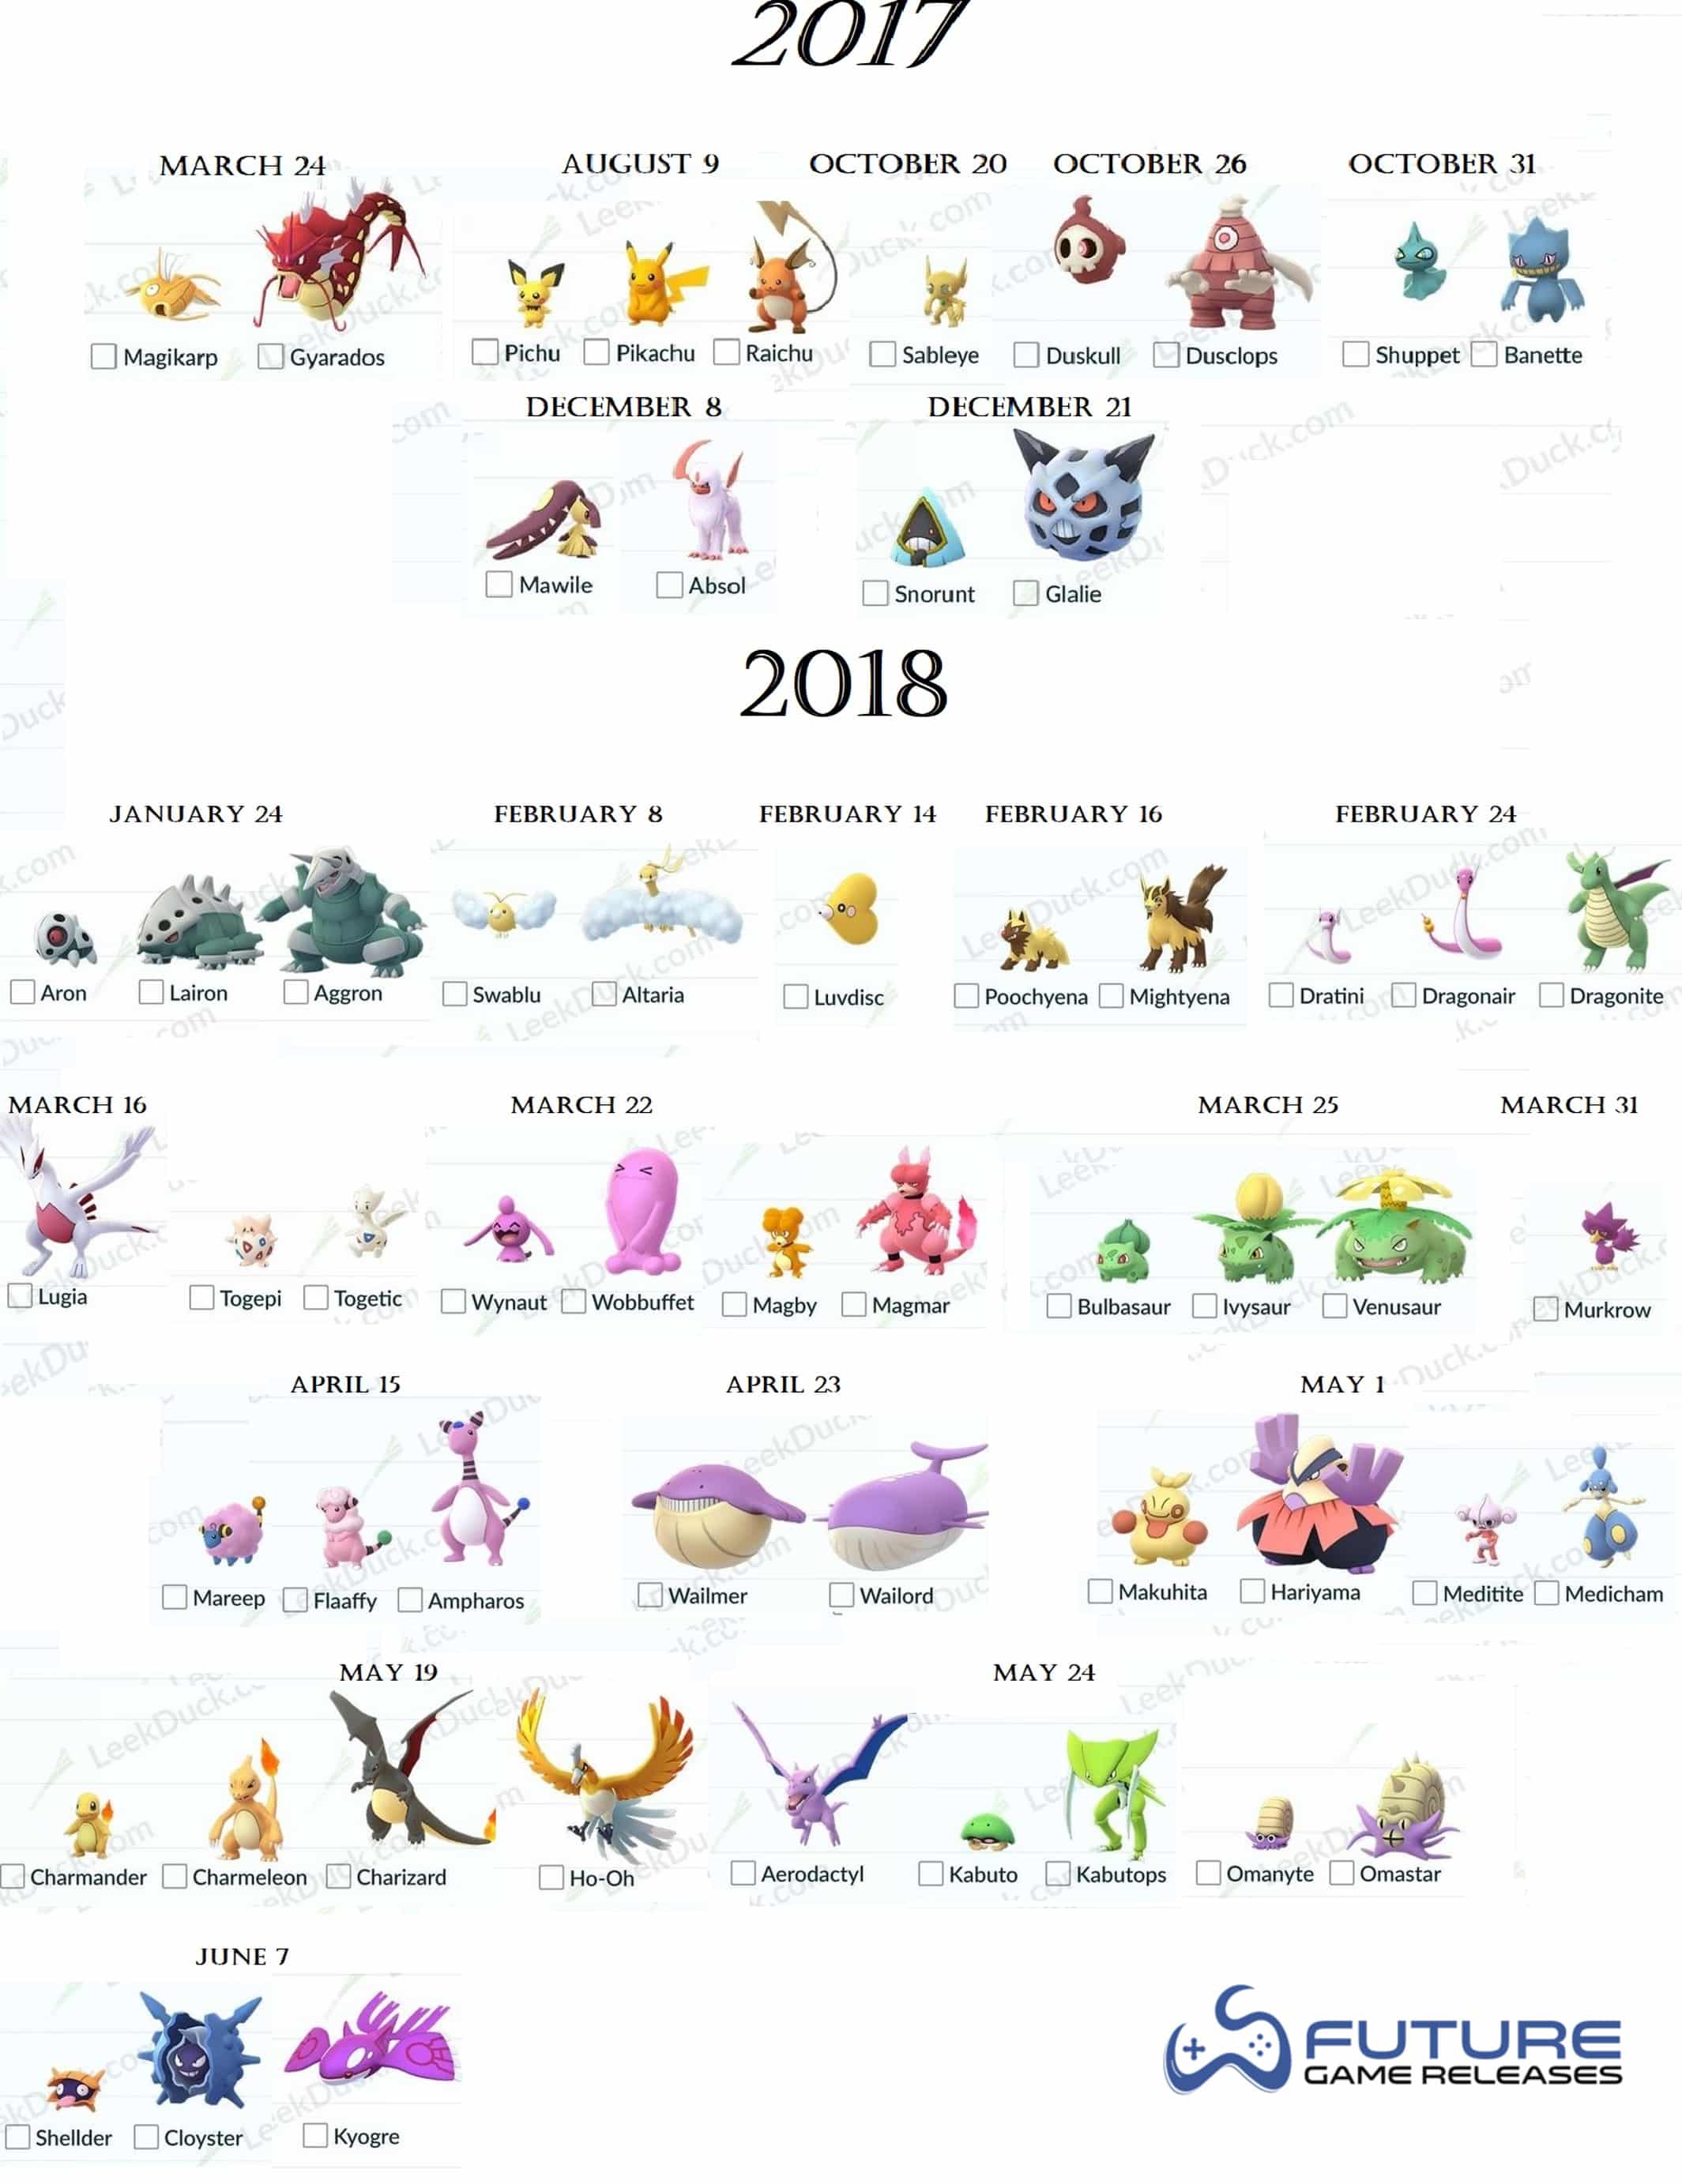 New, Updated List of All Shiny Pokemon in Pokemon Go, Dates Included FGR